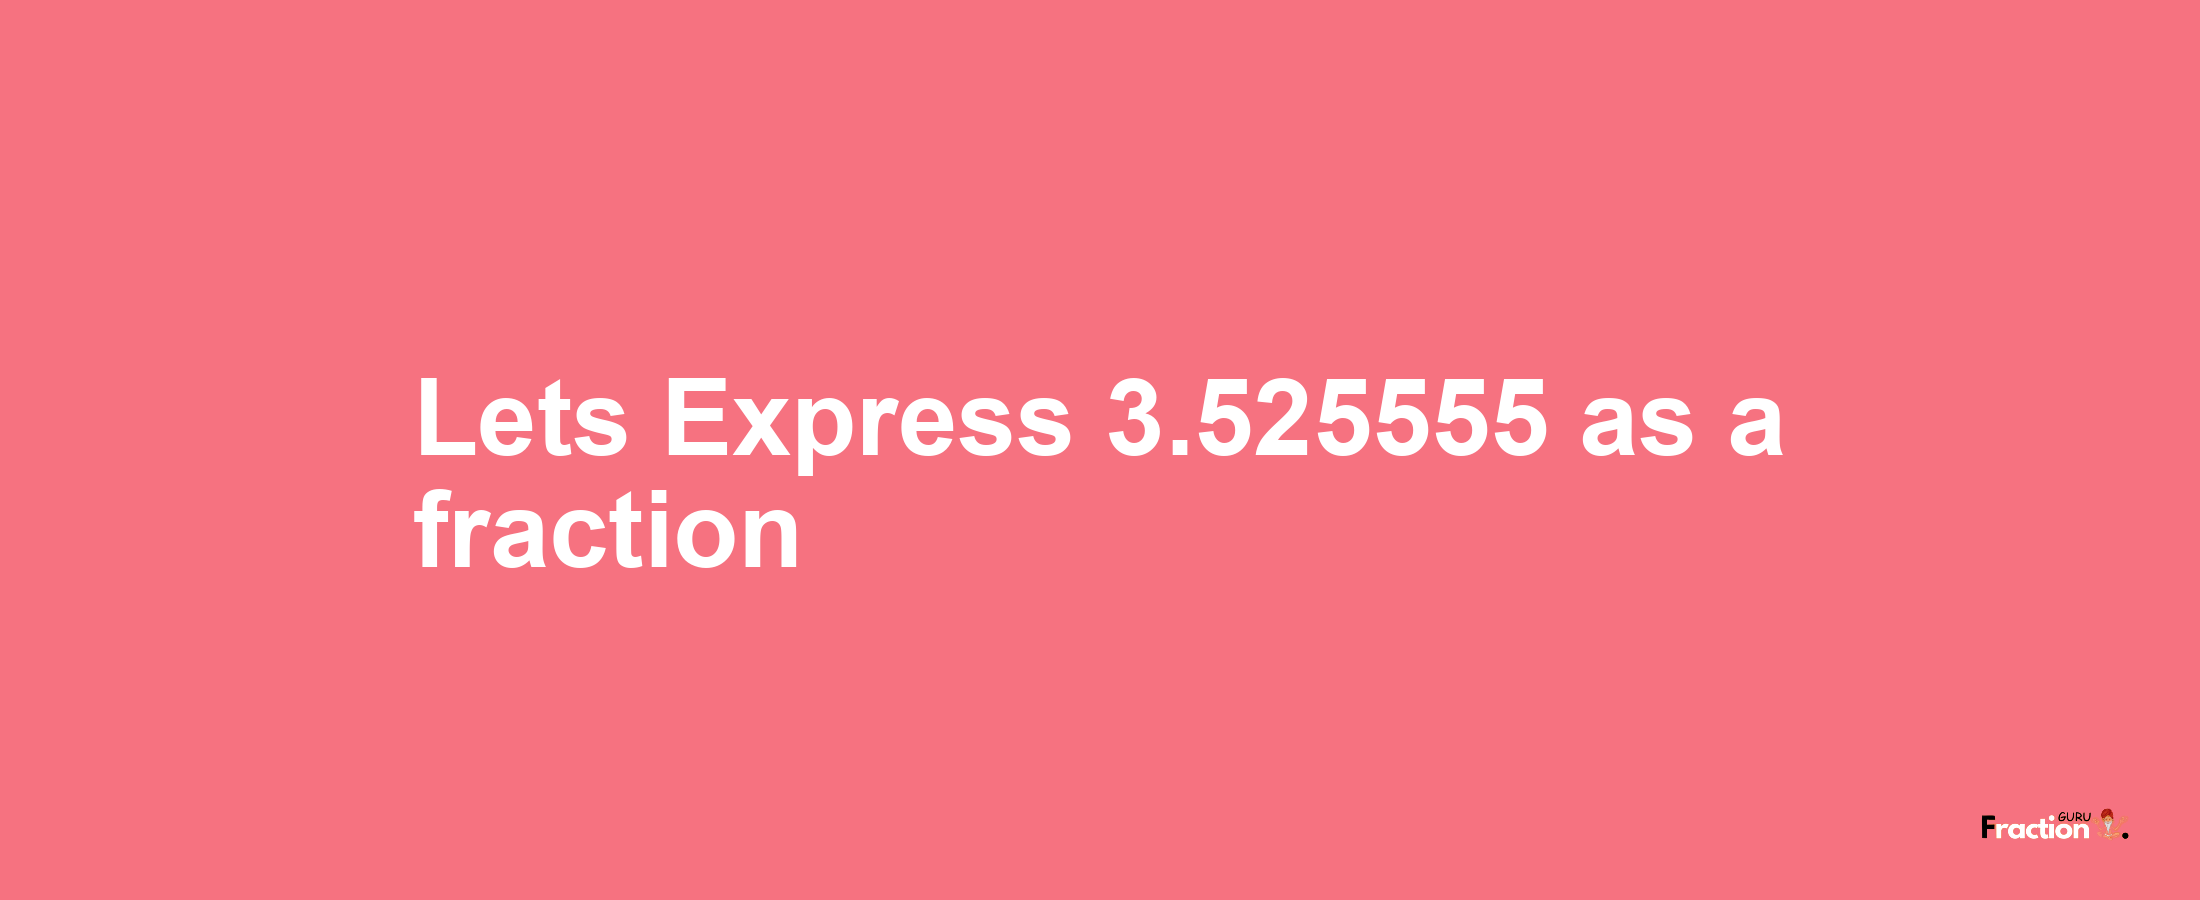 Lets Express 3.525555 as afraction